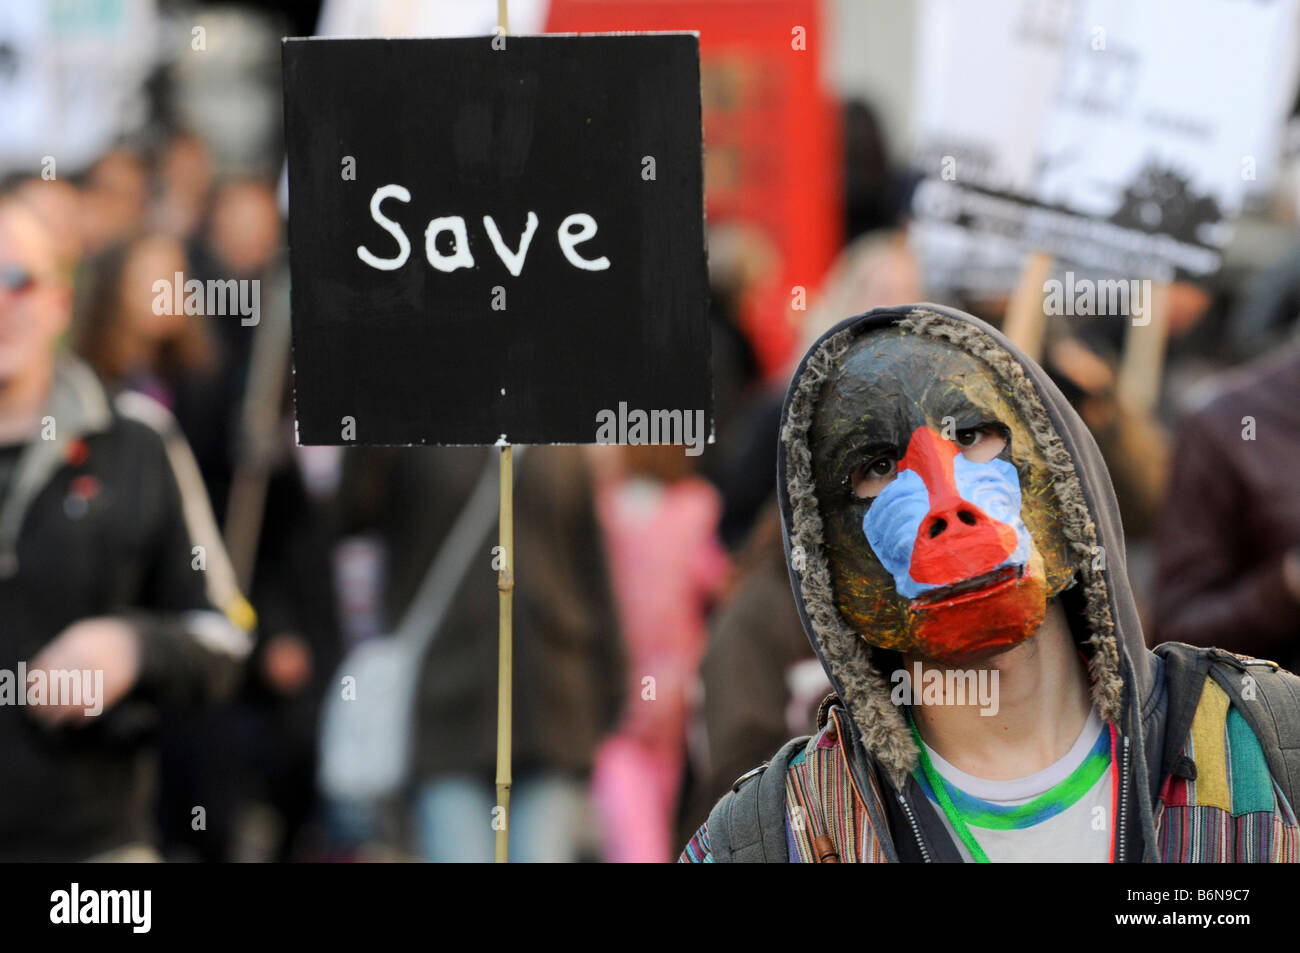 Environmental campaigners in central London protest to demand urgent government action on climate change. Stock Photo